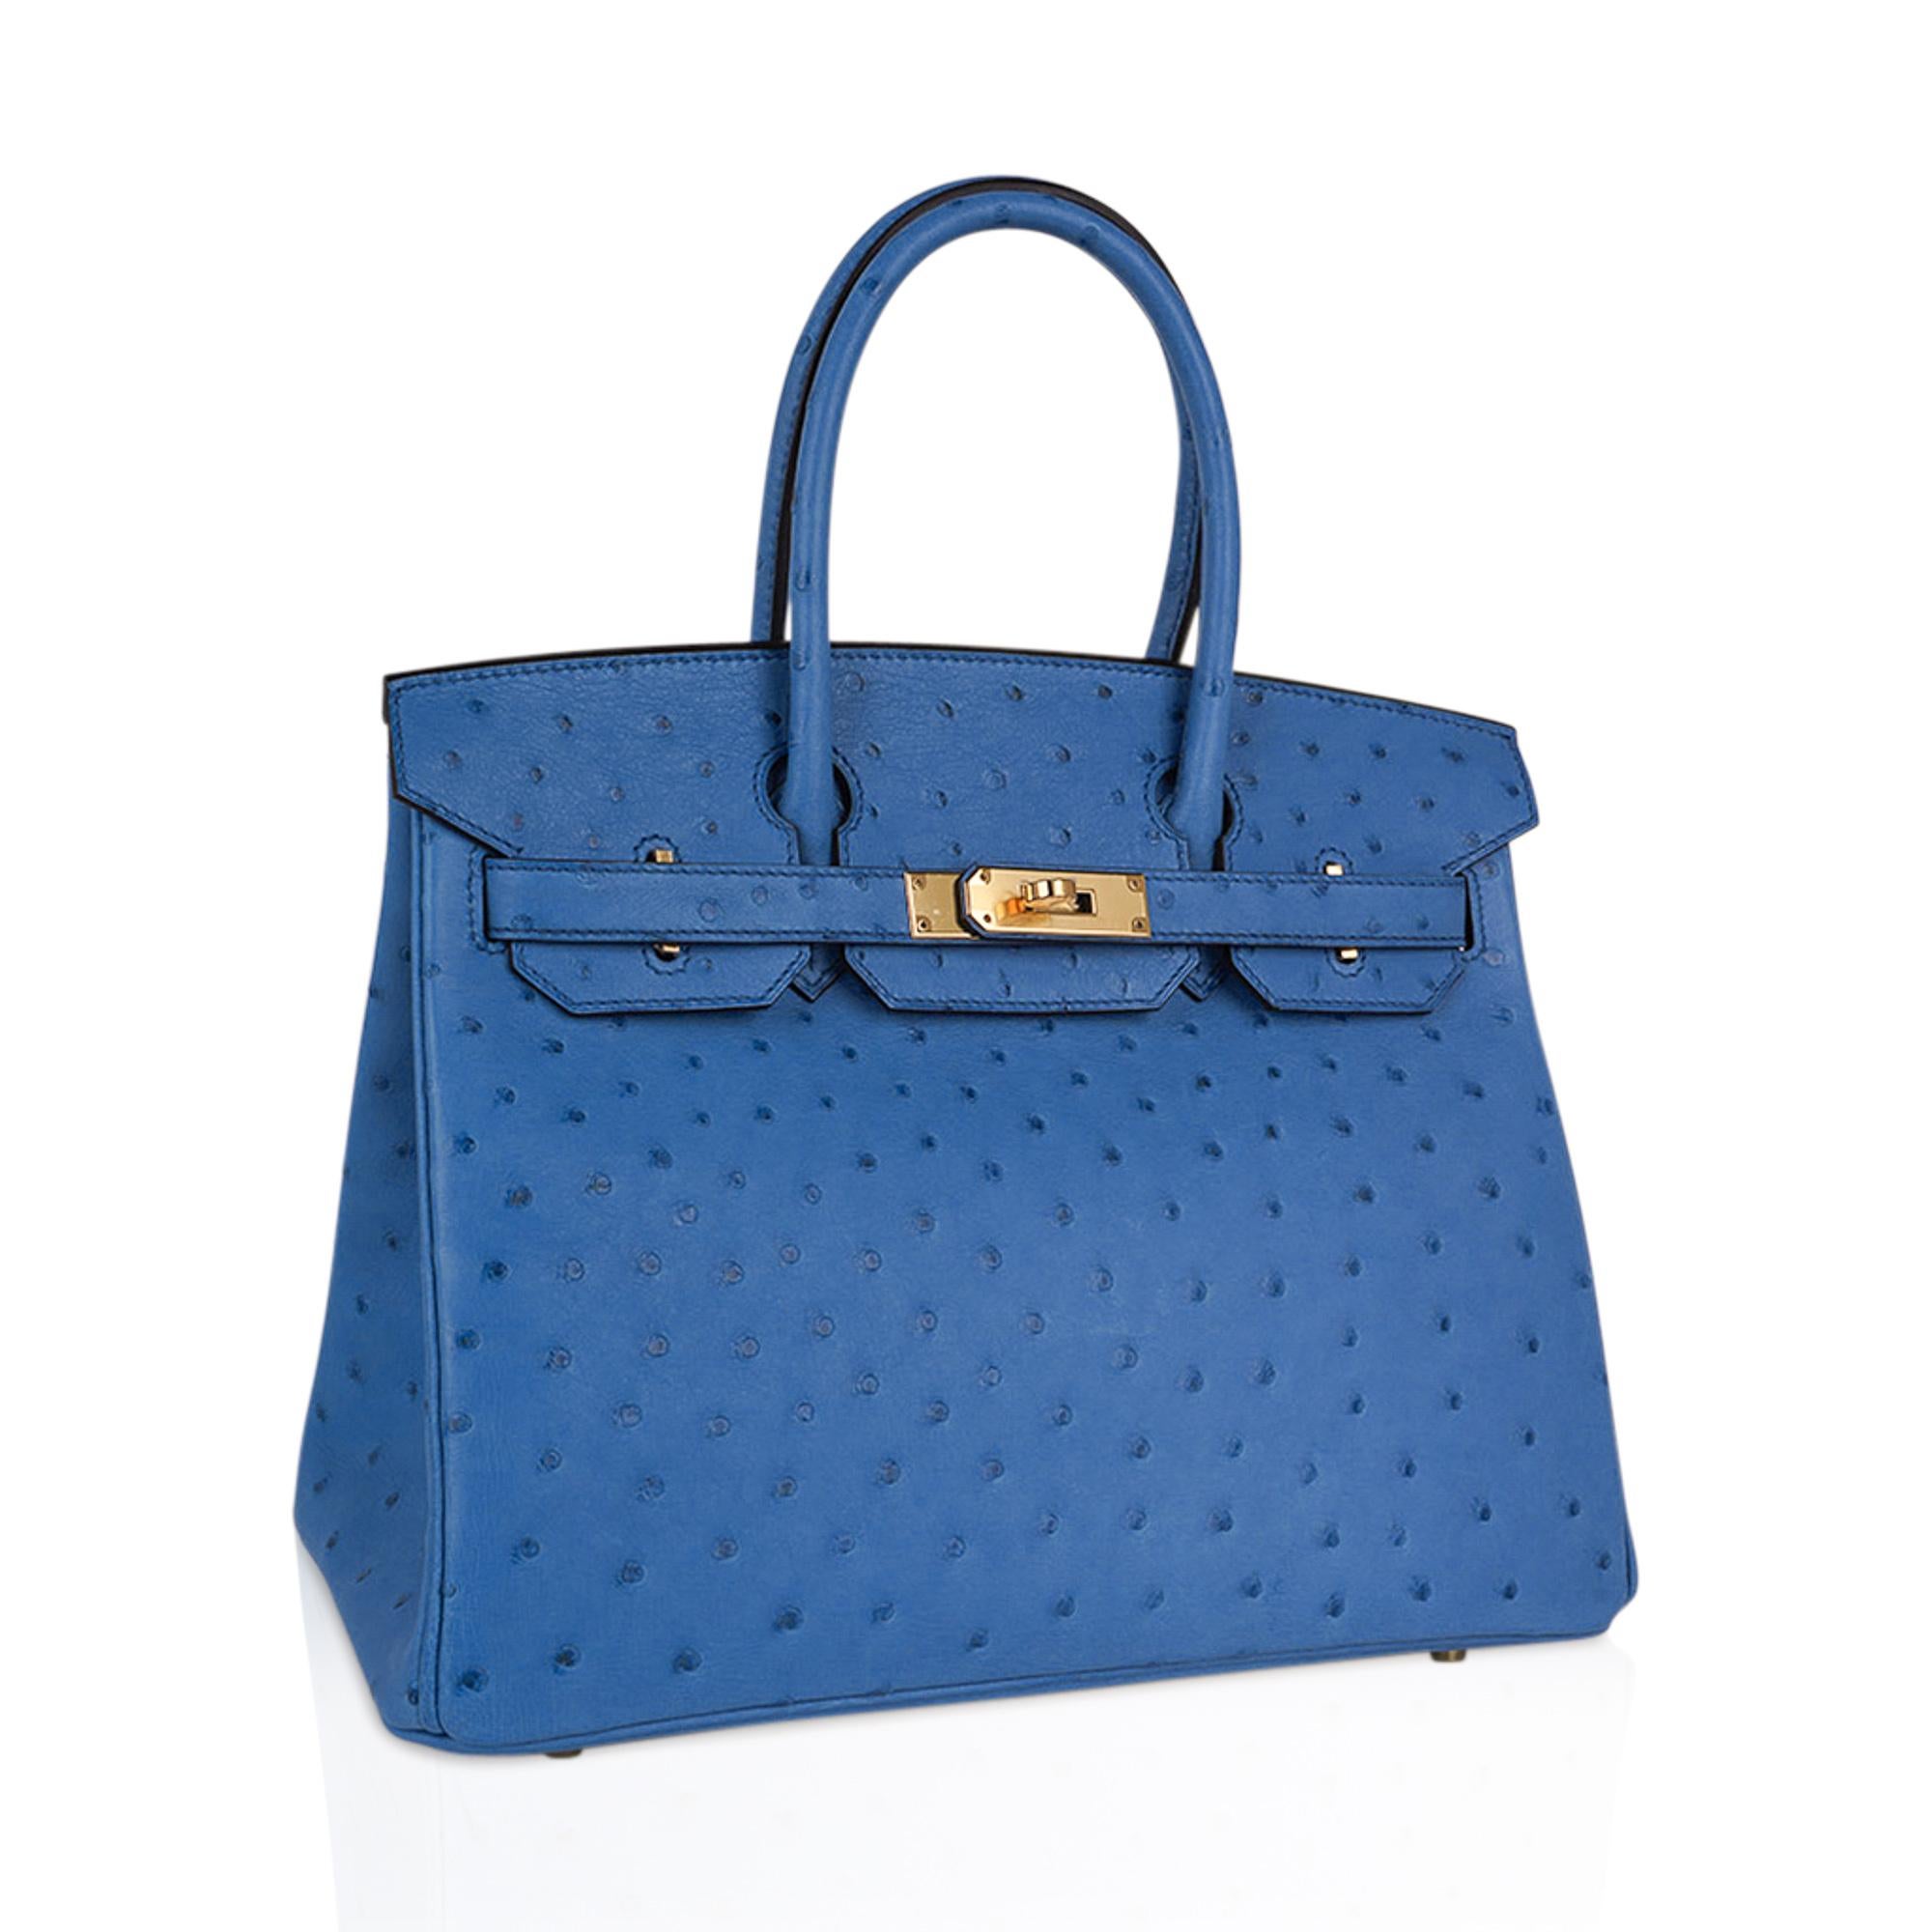 Mightychic offers a rare Hermes Birkin 30 bag featured in gorgeous Bleu Mykonos.
This beautiful tone of Blue is neutral and perfect for year round wear.
Lush with gold hardware.
A magnificent addition to any Hermes Birkin collection.
Comes with the